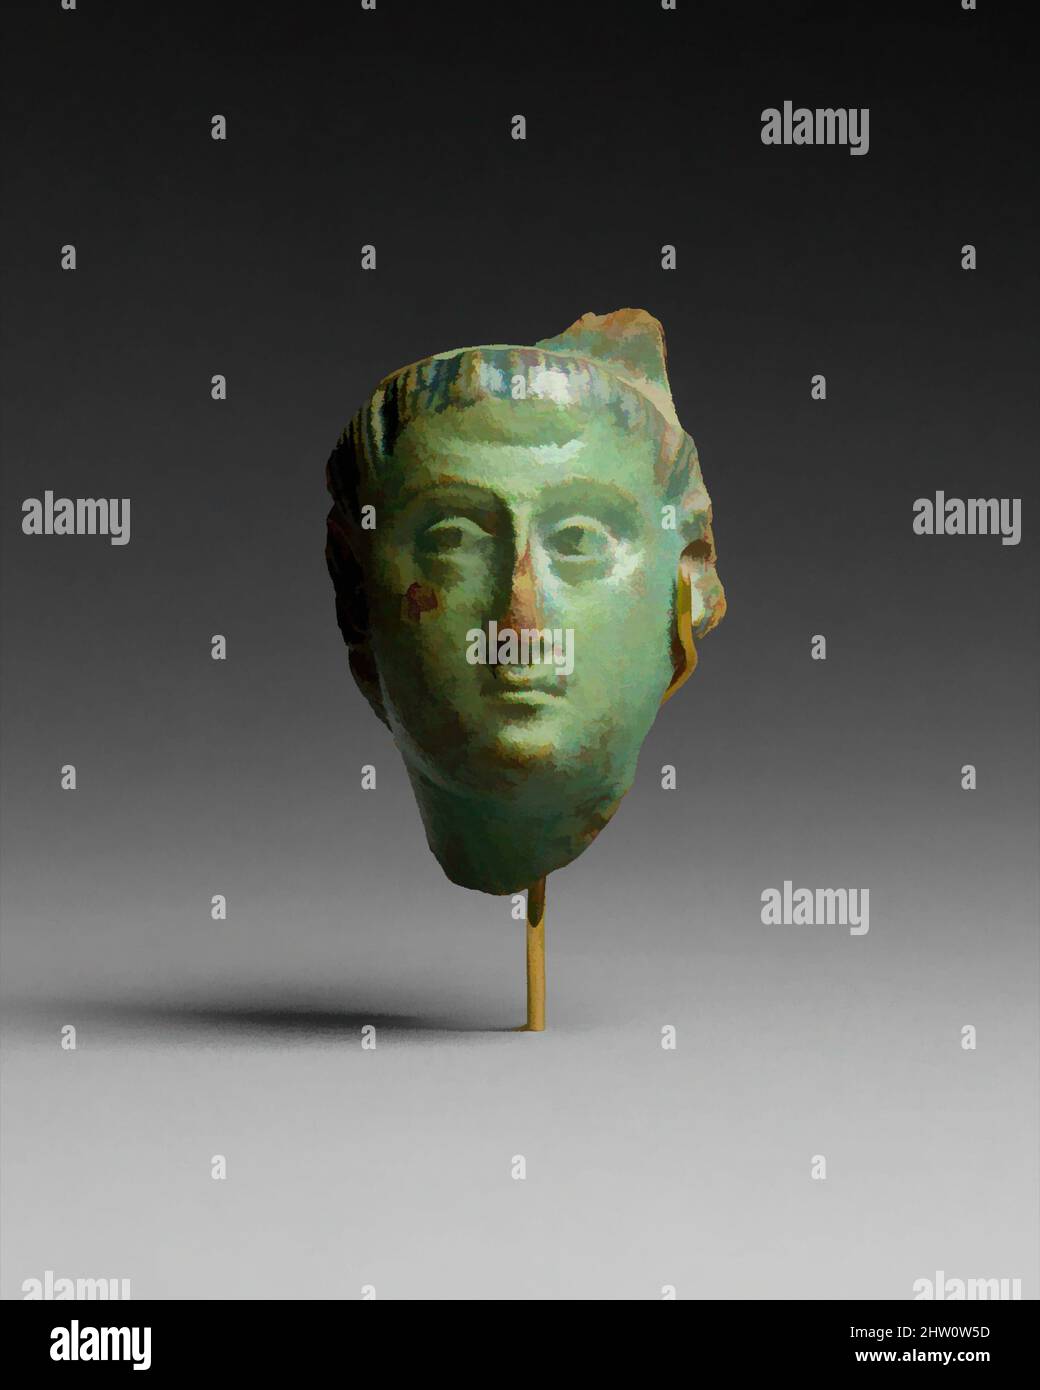 Art inspired by Head, Ptolemy III (?), Ptolemaic Period, 246–222 B.C., From Egypt, Faience, H. 4.4 cm (1 3/4 in.); W. 3 cm (1 3/16 in.); D. 2 cm (13/16 in.), Wearing the diadem of a Ptolemaic ruler, this head is thought to represent Ptolemy III. The head is broken away from a vessel, Classic works modernized by Artotop with a splash of modernity. Shapes, color and value, eye-catching visual impact on art. Emotions through freedom of artworks in a contemporary way. A timeless message pursuing a wildly creative new direction. Artists turning to the digital medium and creating the Artotop NFT Stock Photo